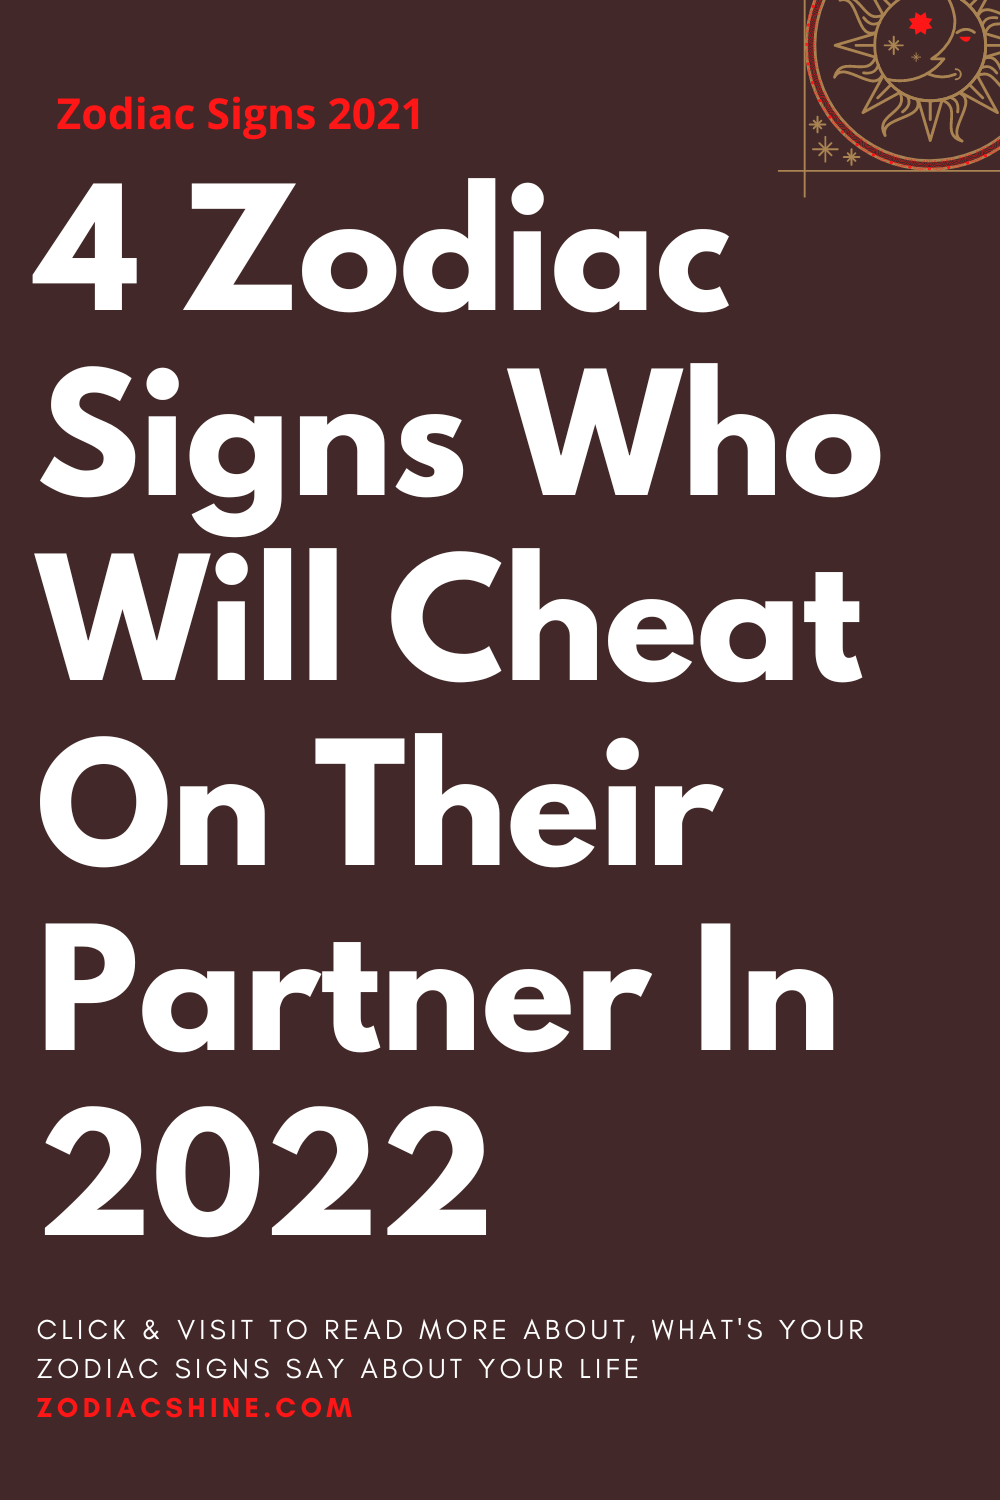 4 Zodiac Signs Who Will Cheat On Their Partner In 2022